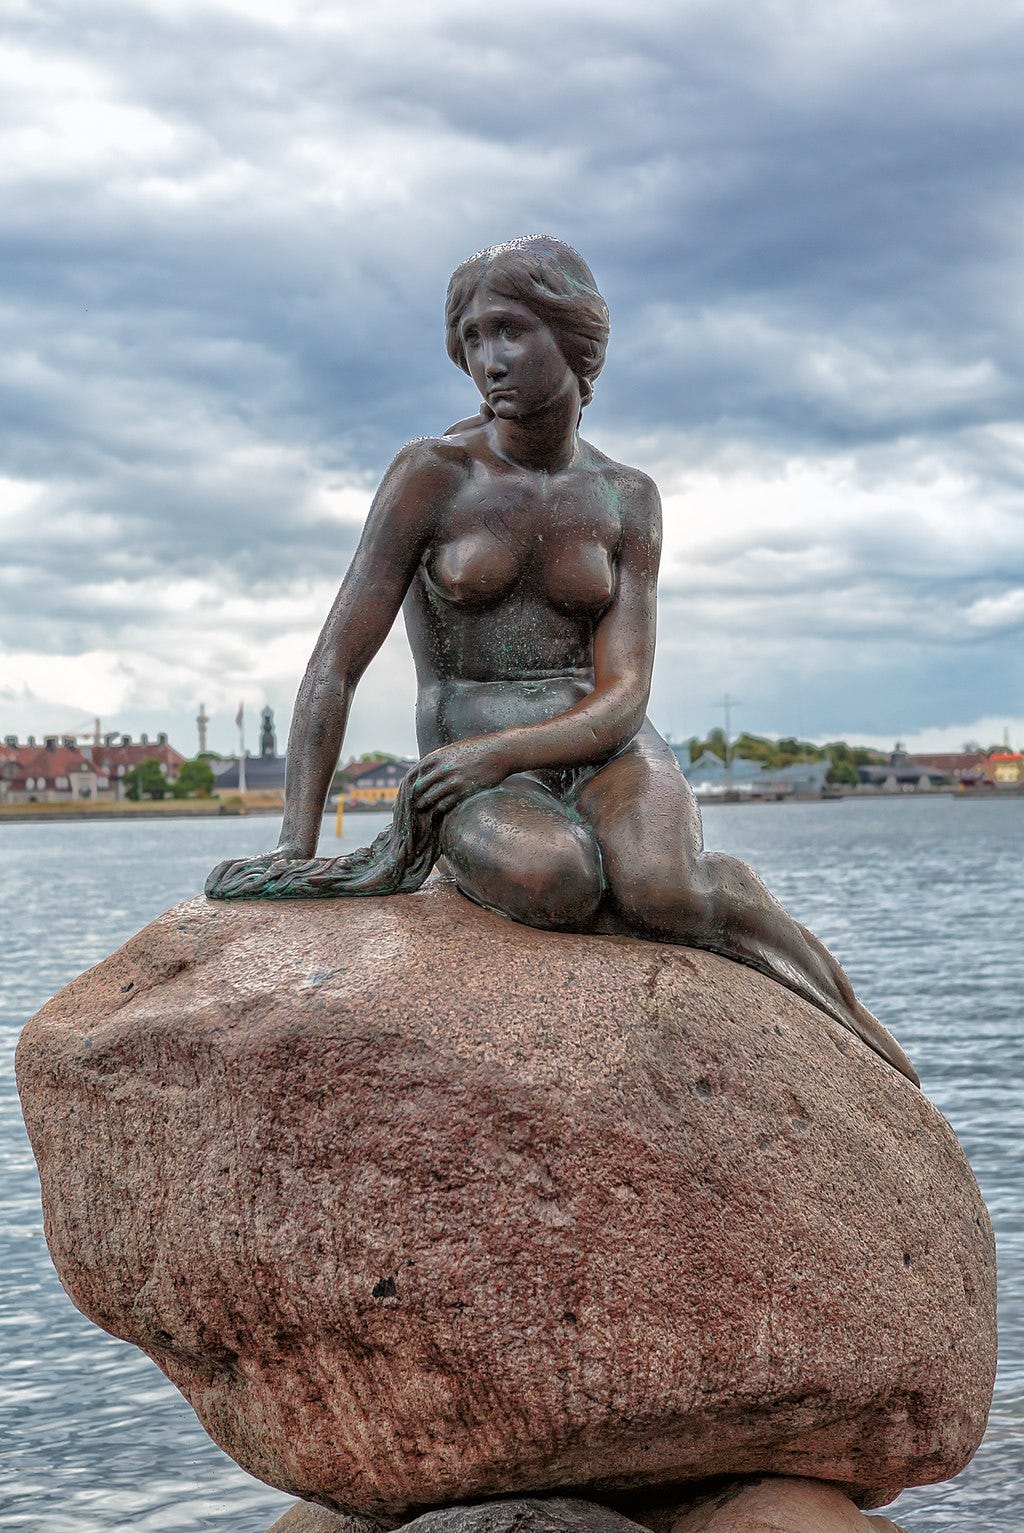 A statue of a mermaid sitting on a rock, surrounded by water.